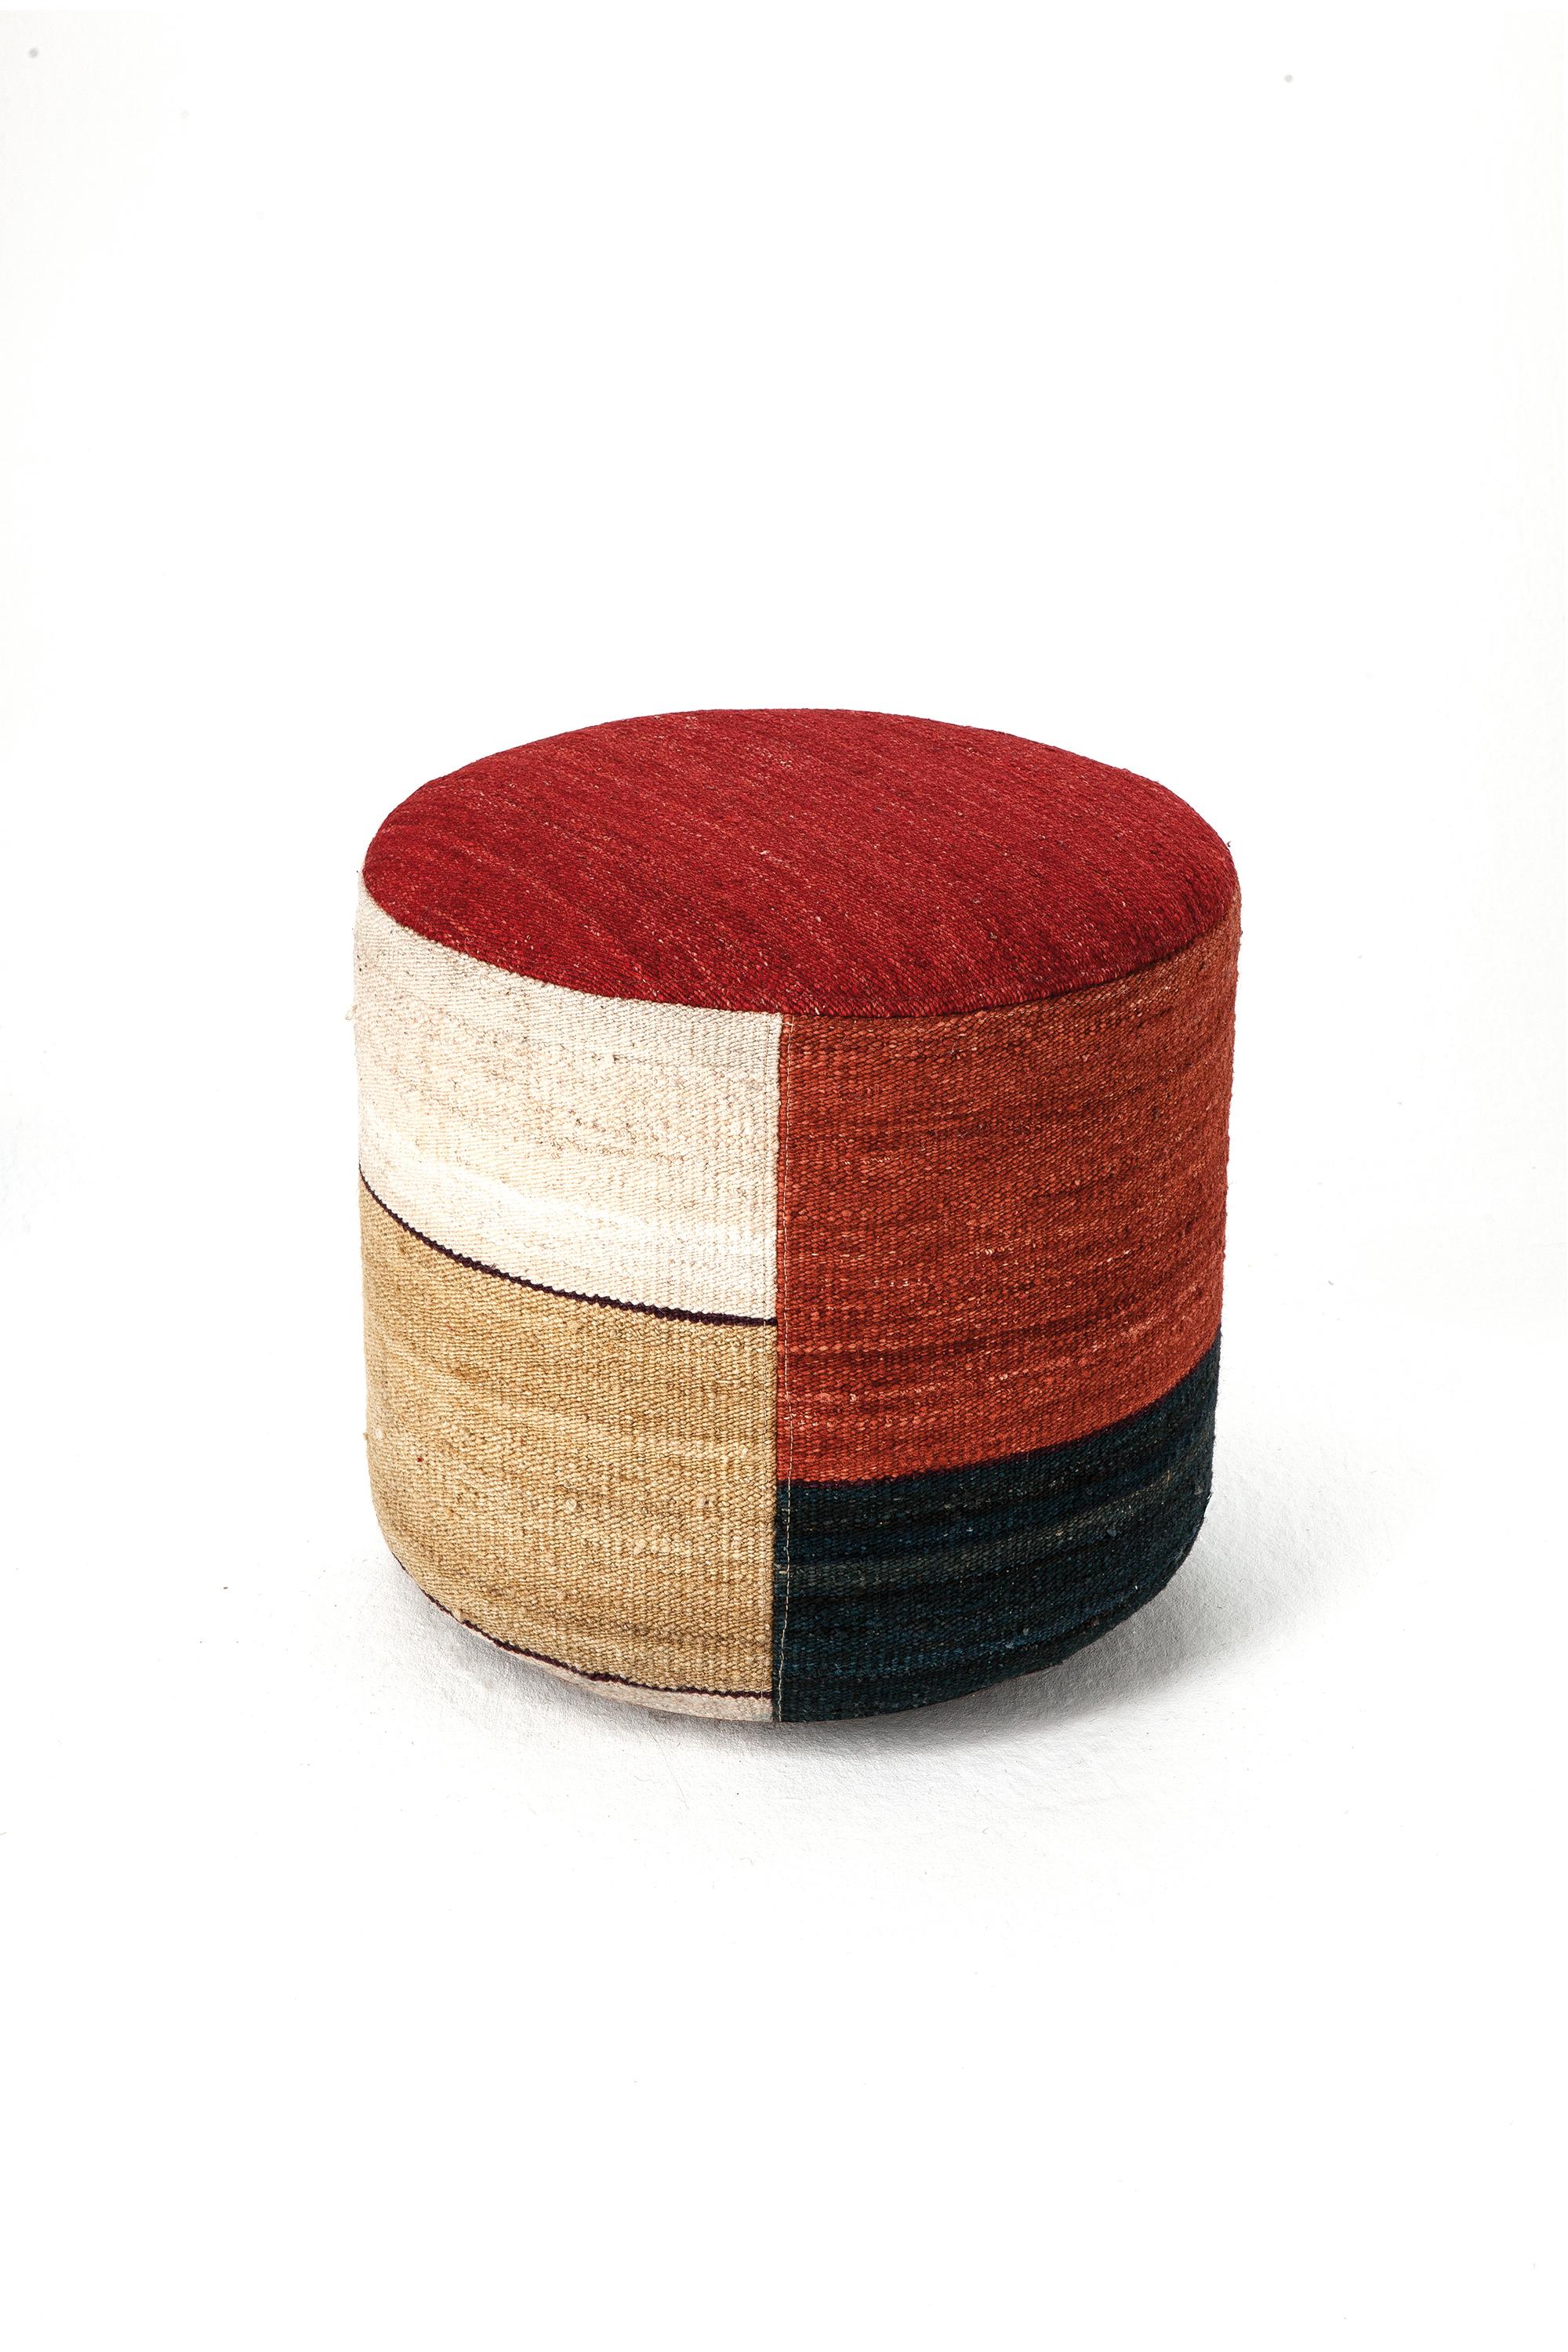 'Kilim 2' Pouf by Nani Marquina and Marcos Catalán for Nanimarquina For Sale 8